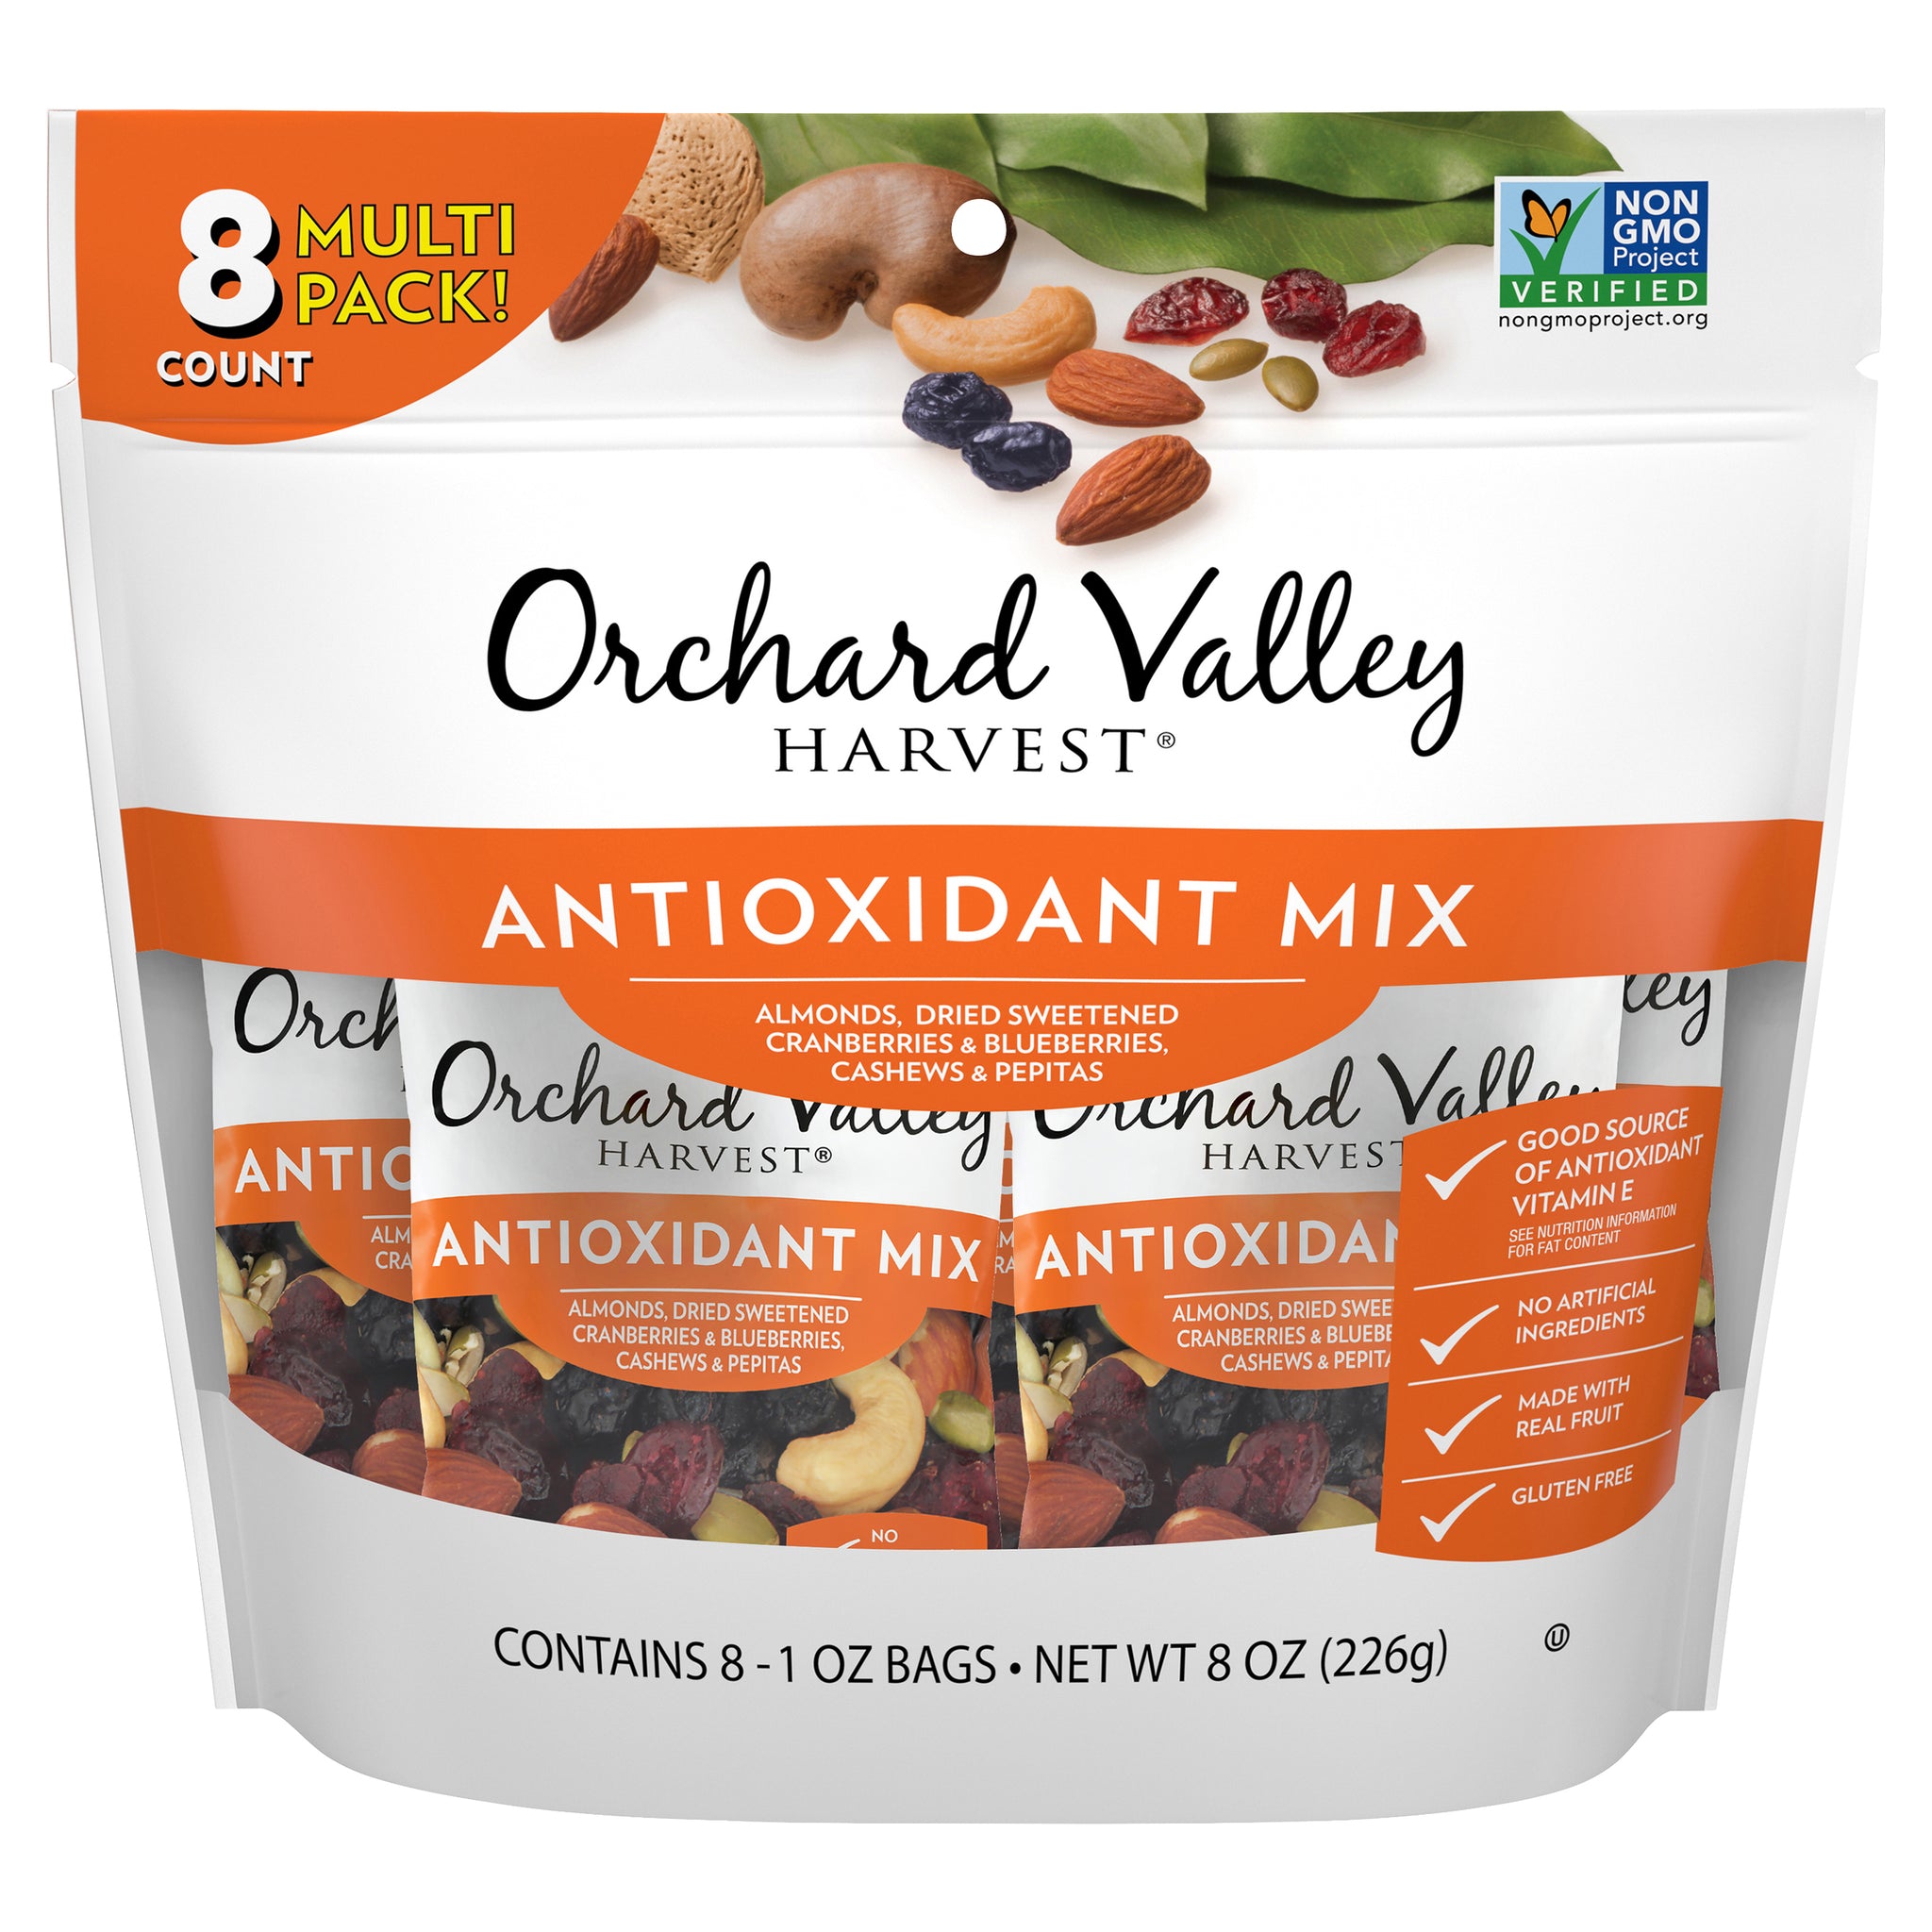 ORCHARD VALLEY HARVEST Antioxidant Mix, Packs, 8 Ct, , Non-GMO